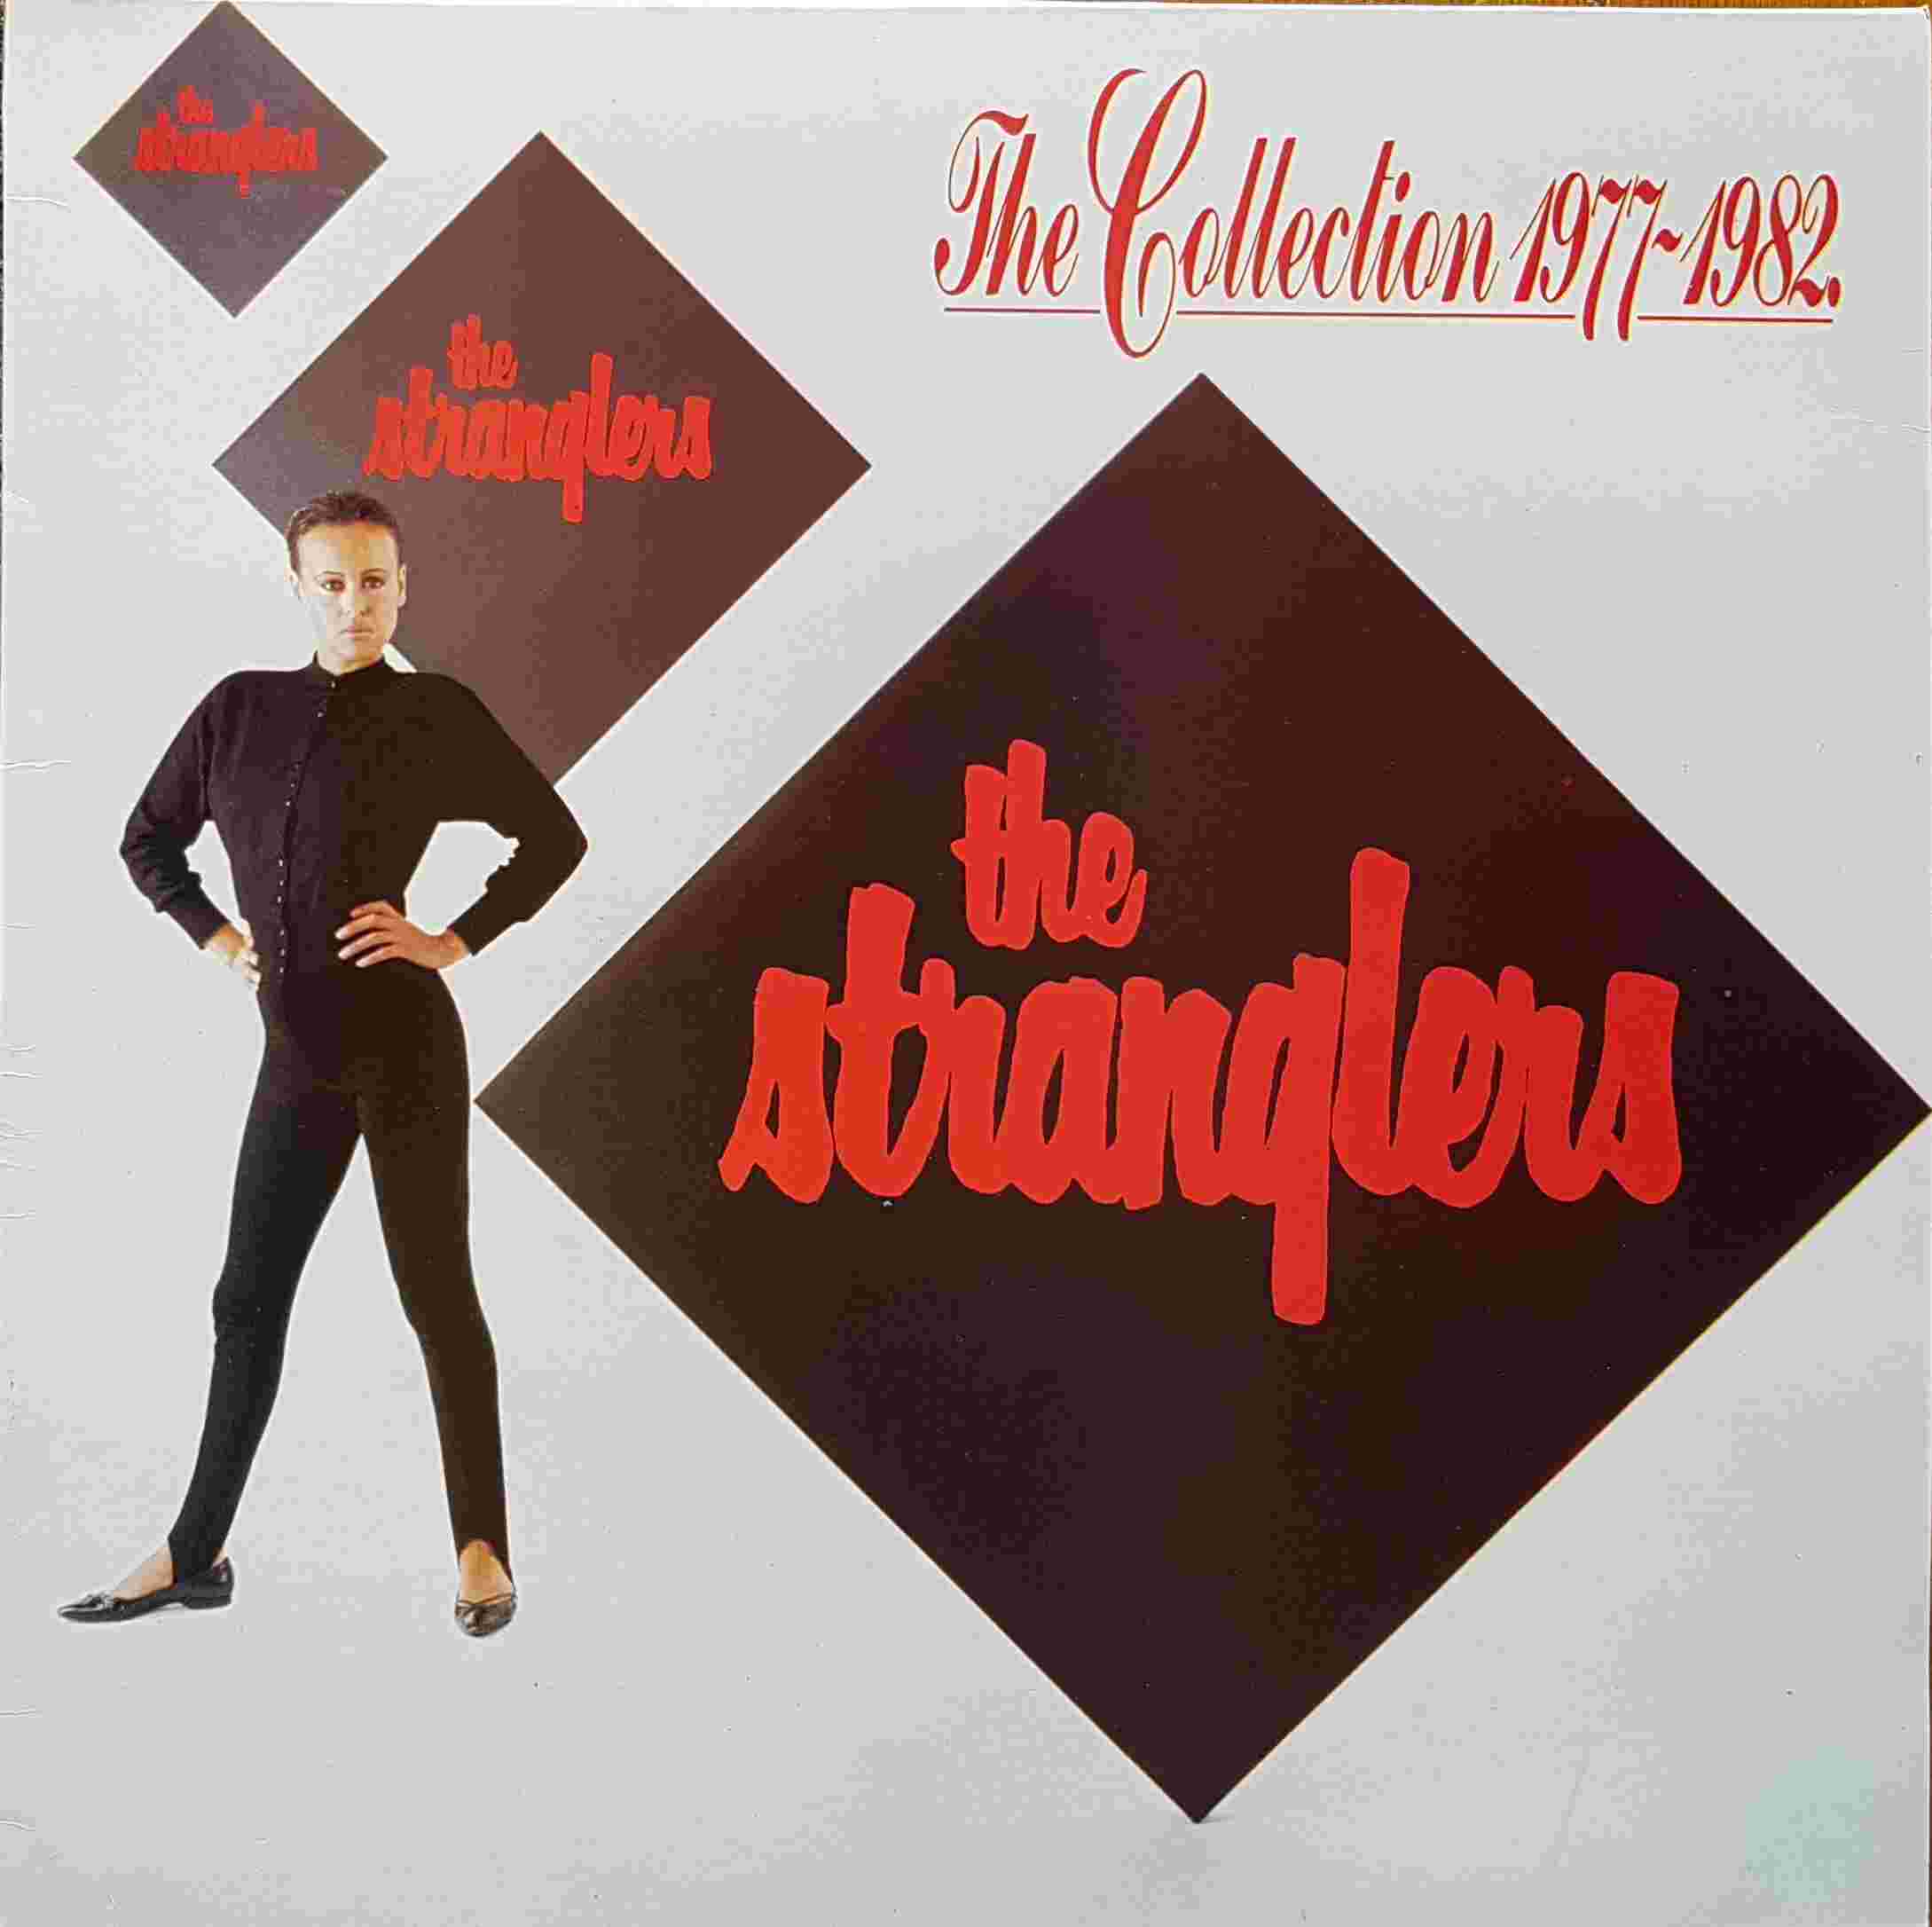 Picture of LBG 30353 (R) The collection 1977 - 1982 by artist The Stranglers 